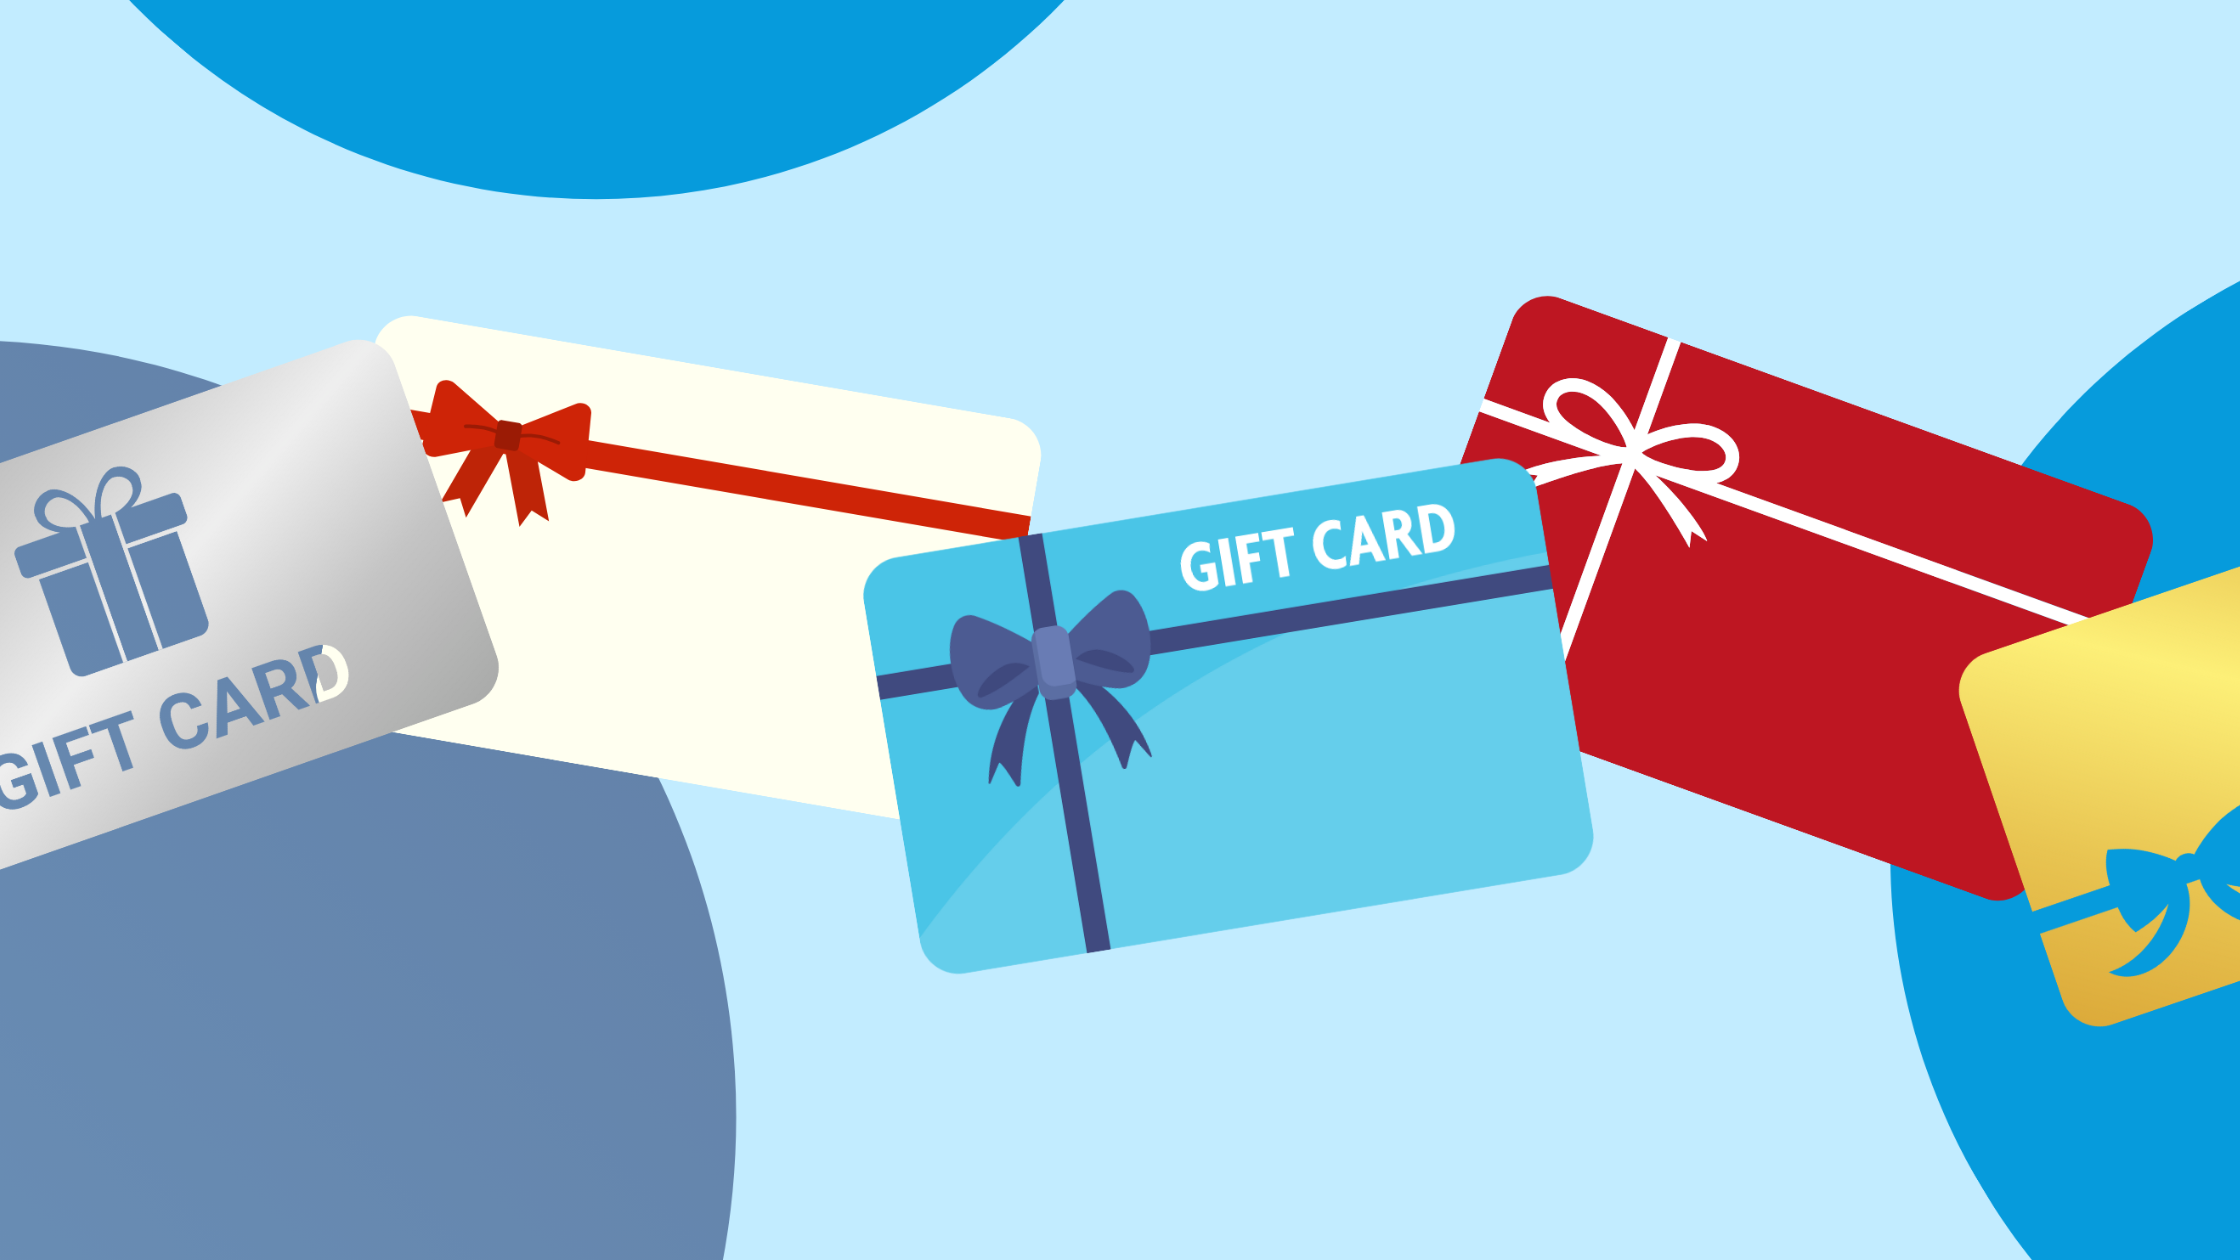 Illustration of a variety of gift cards